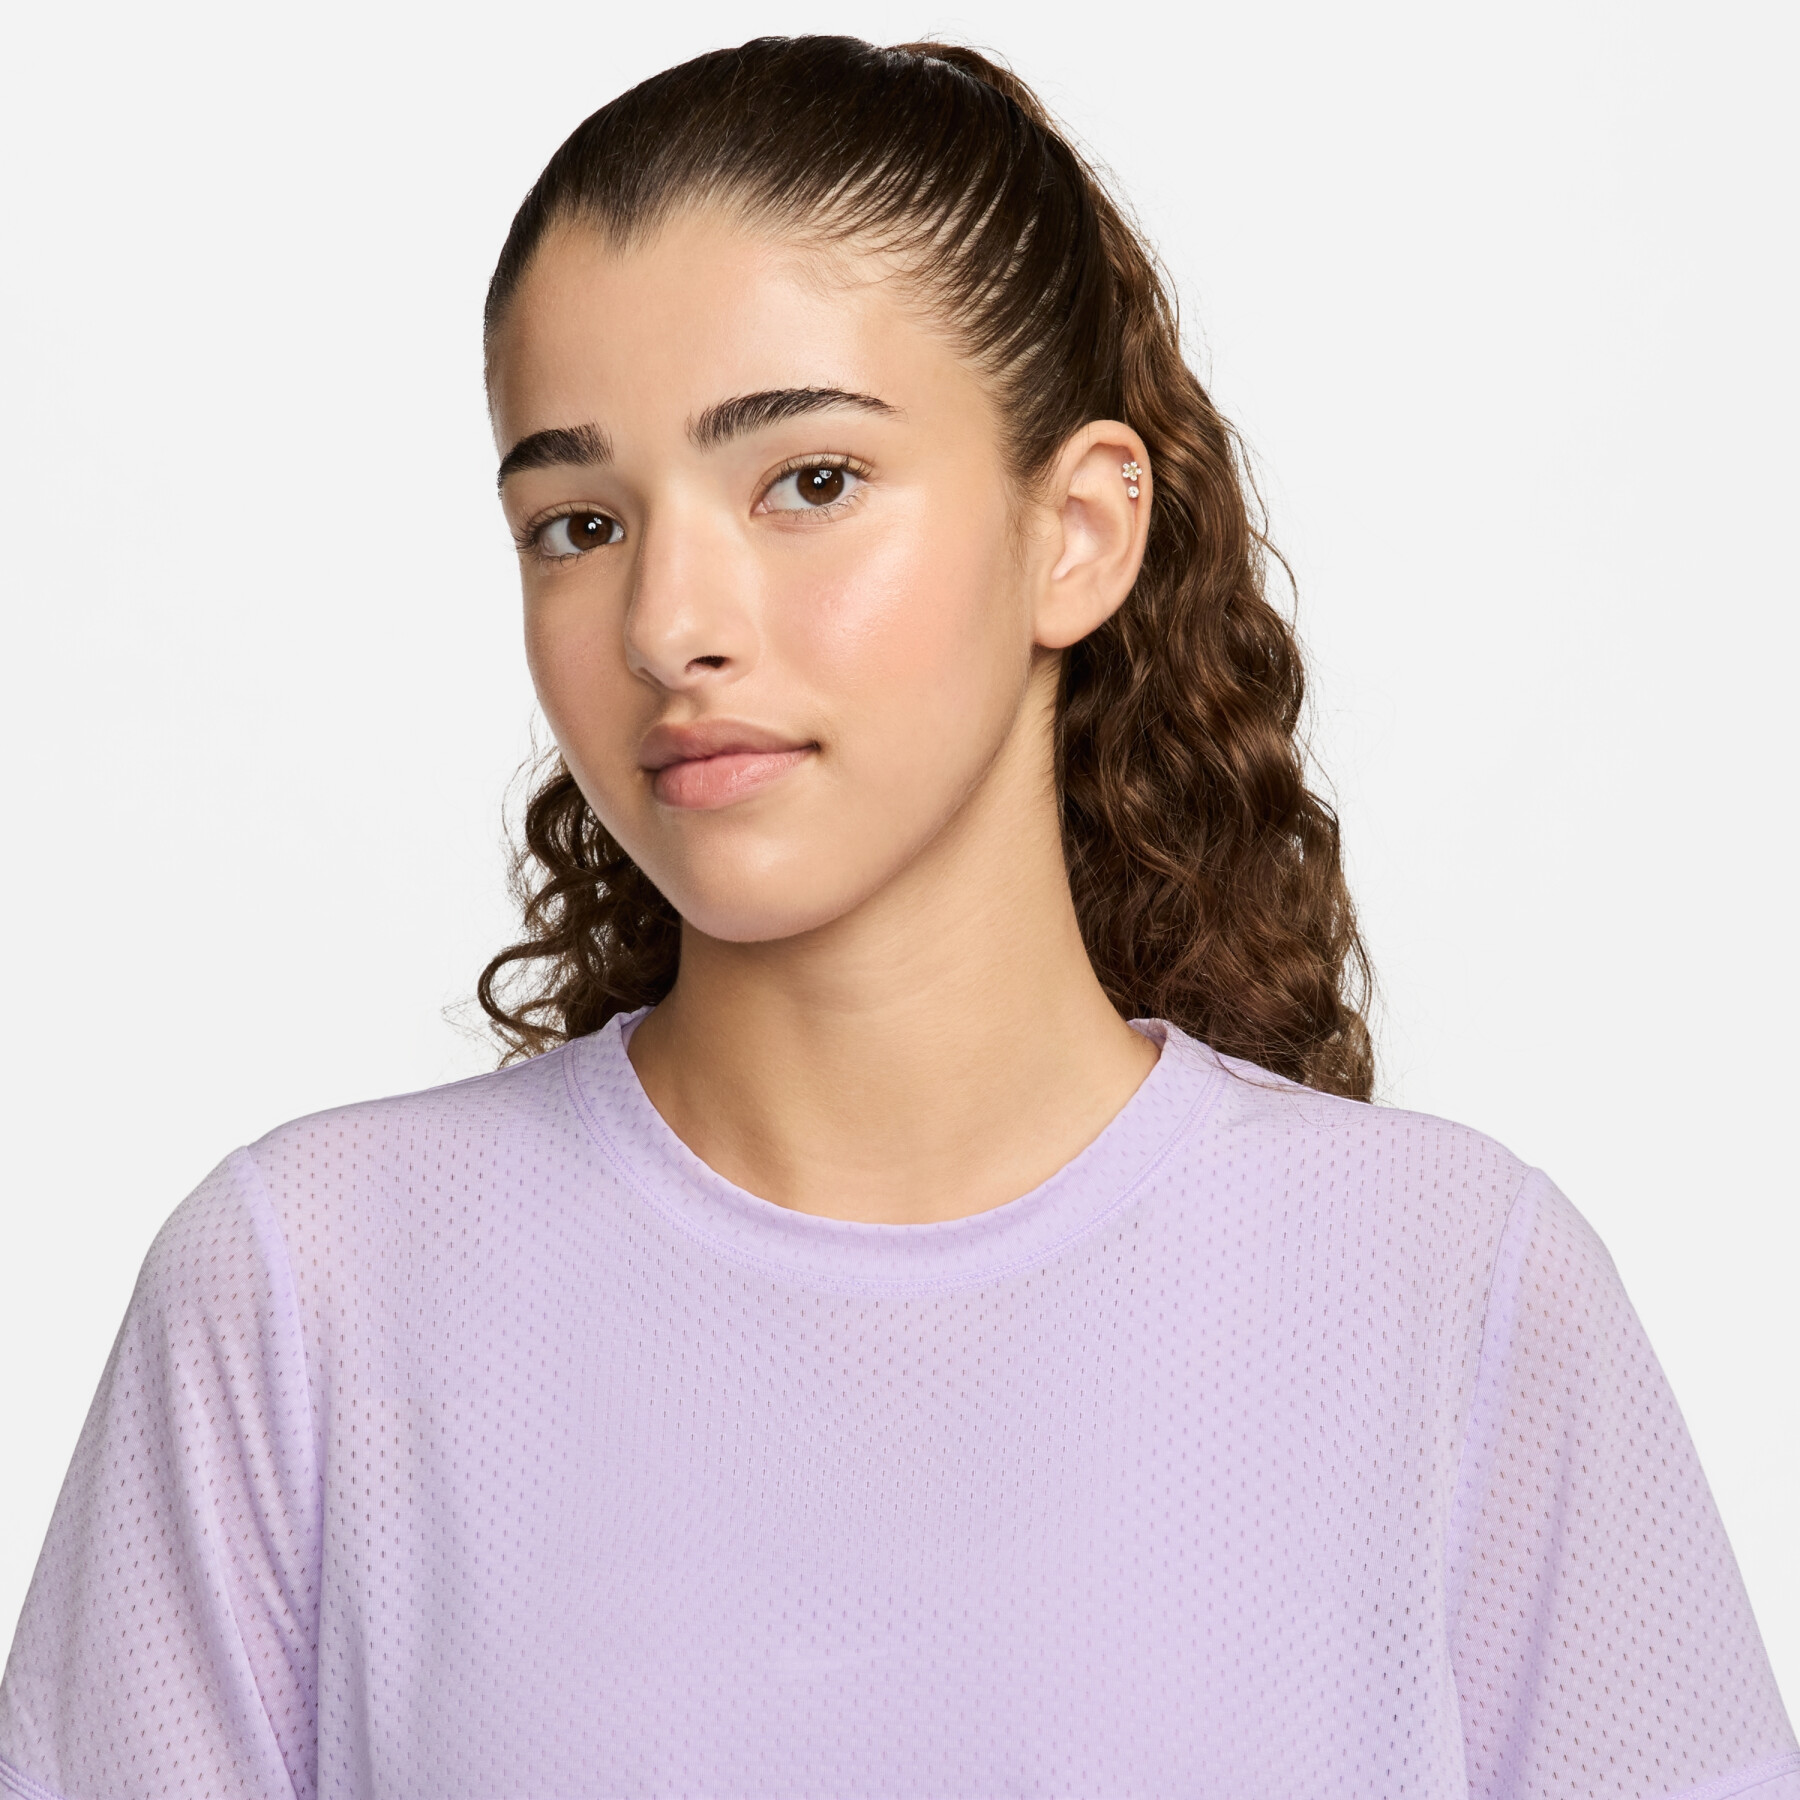 Women's crop top Nike One Classic Breathable